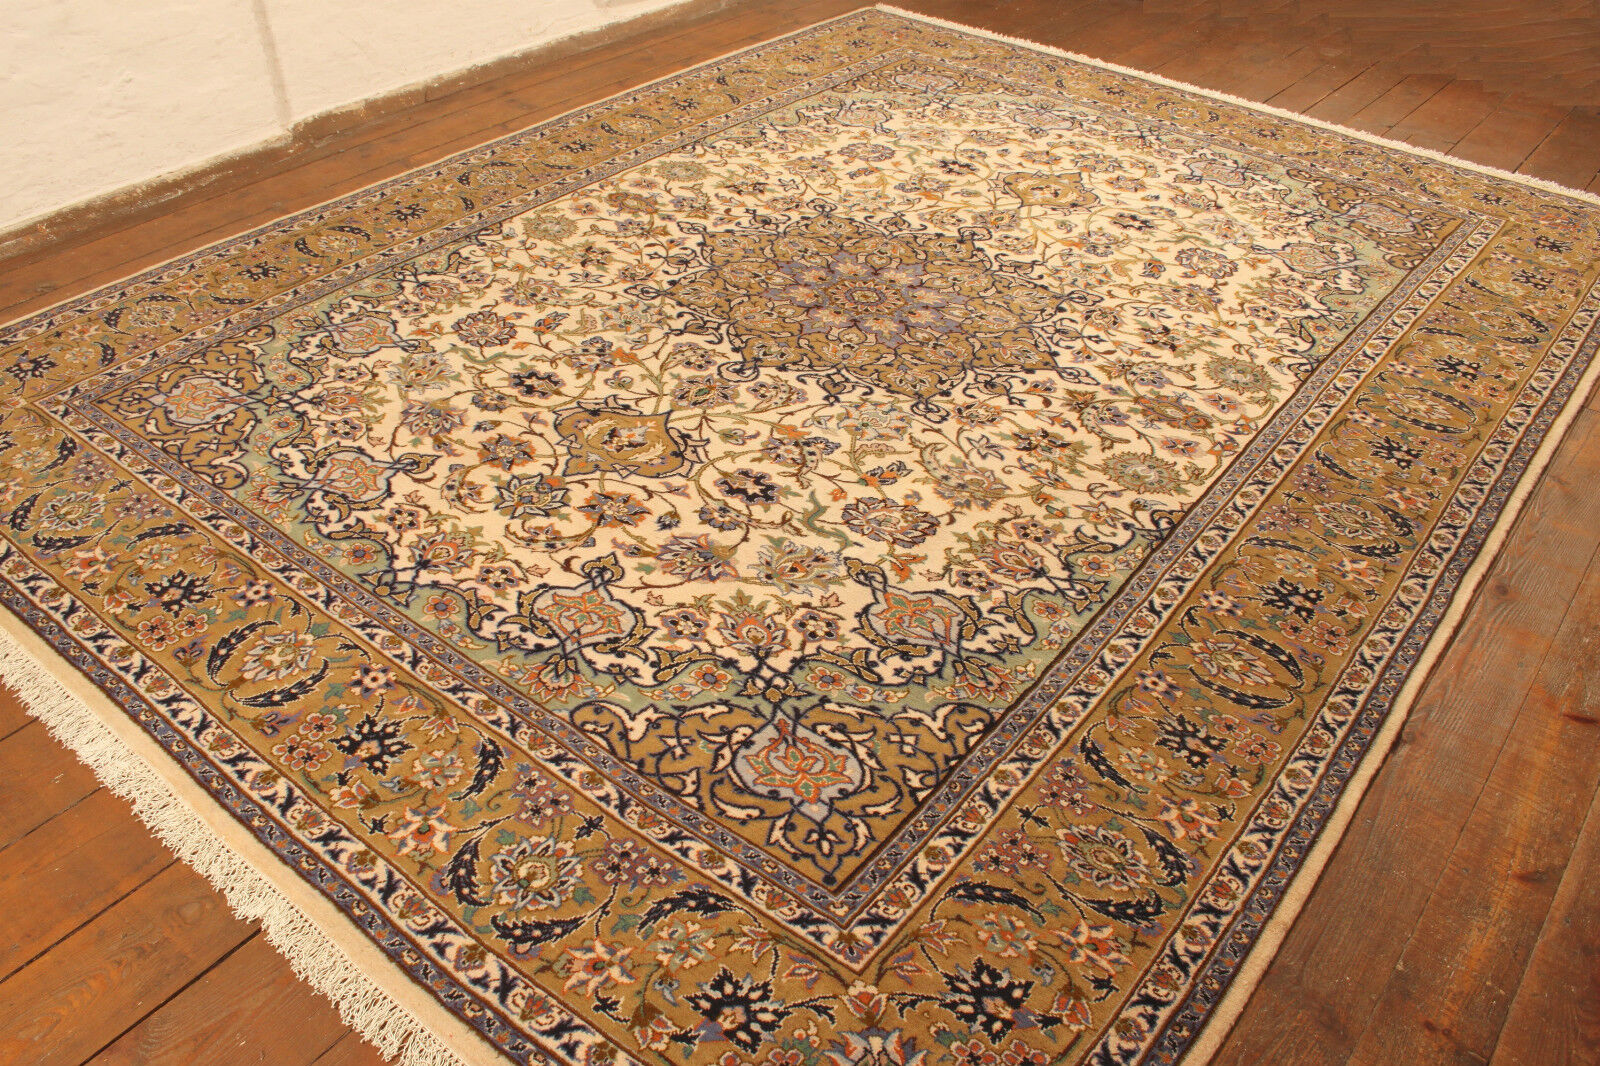 Artistic display of the Handmade Contemporary Persian Isfahan Rug as a room centerpiece